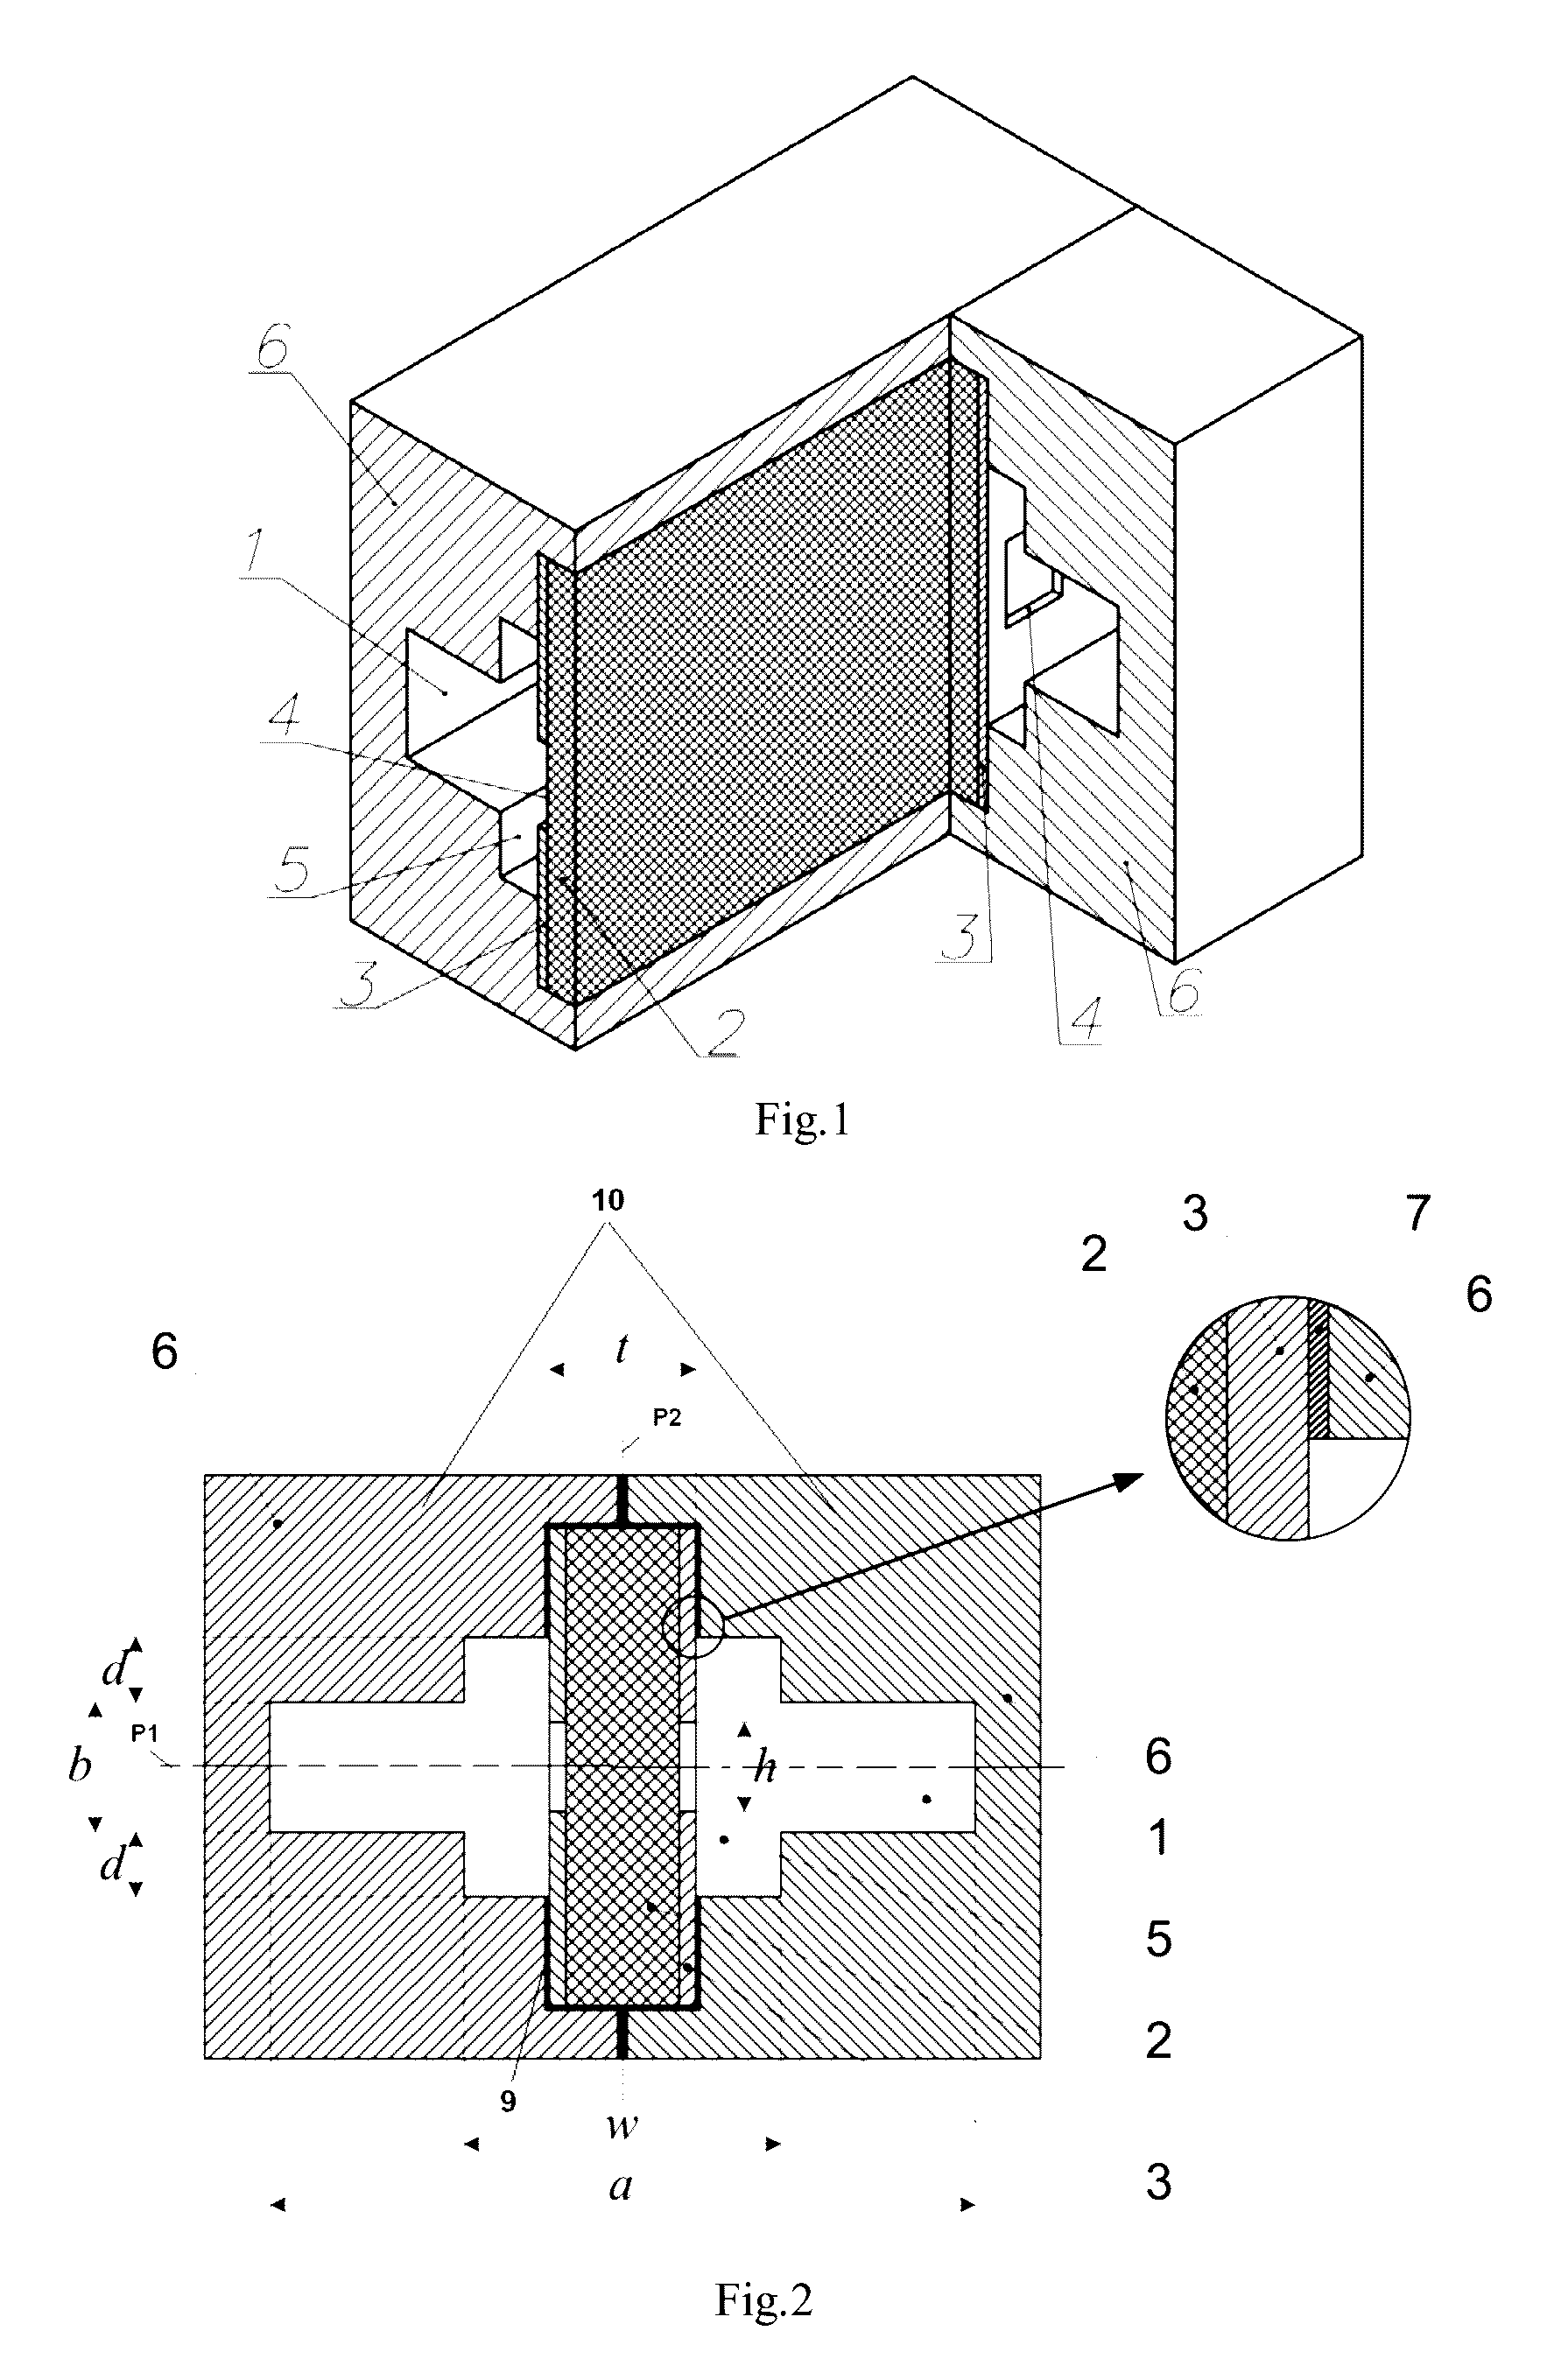 Rectangular band-pass filter having recesses of less than one-quarter wavelength depth formed therein for fitting a dielectric insert with a superconductive film within the recesses